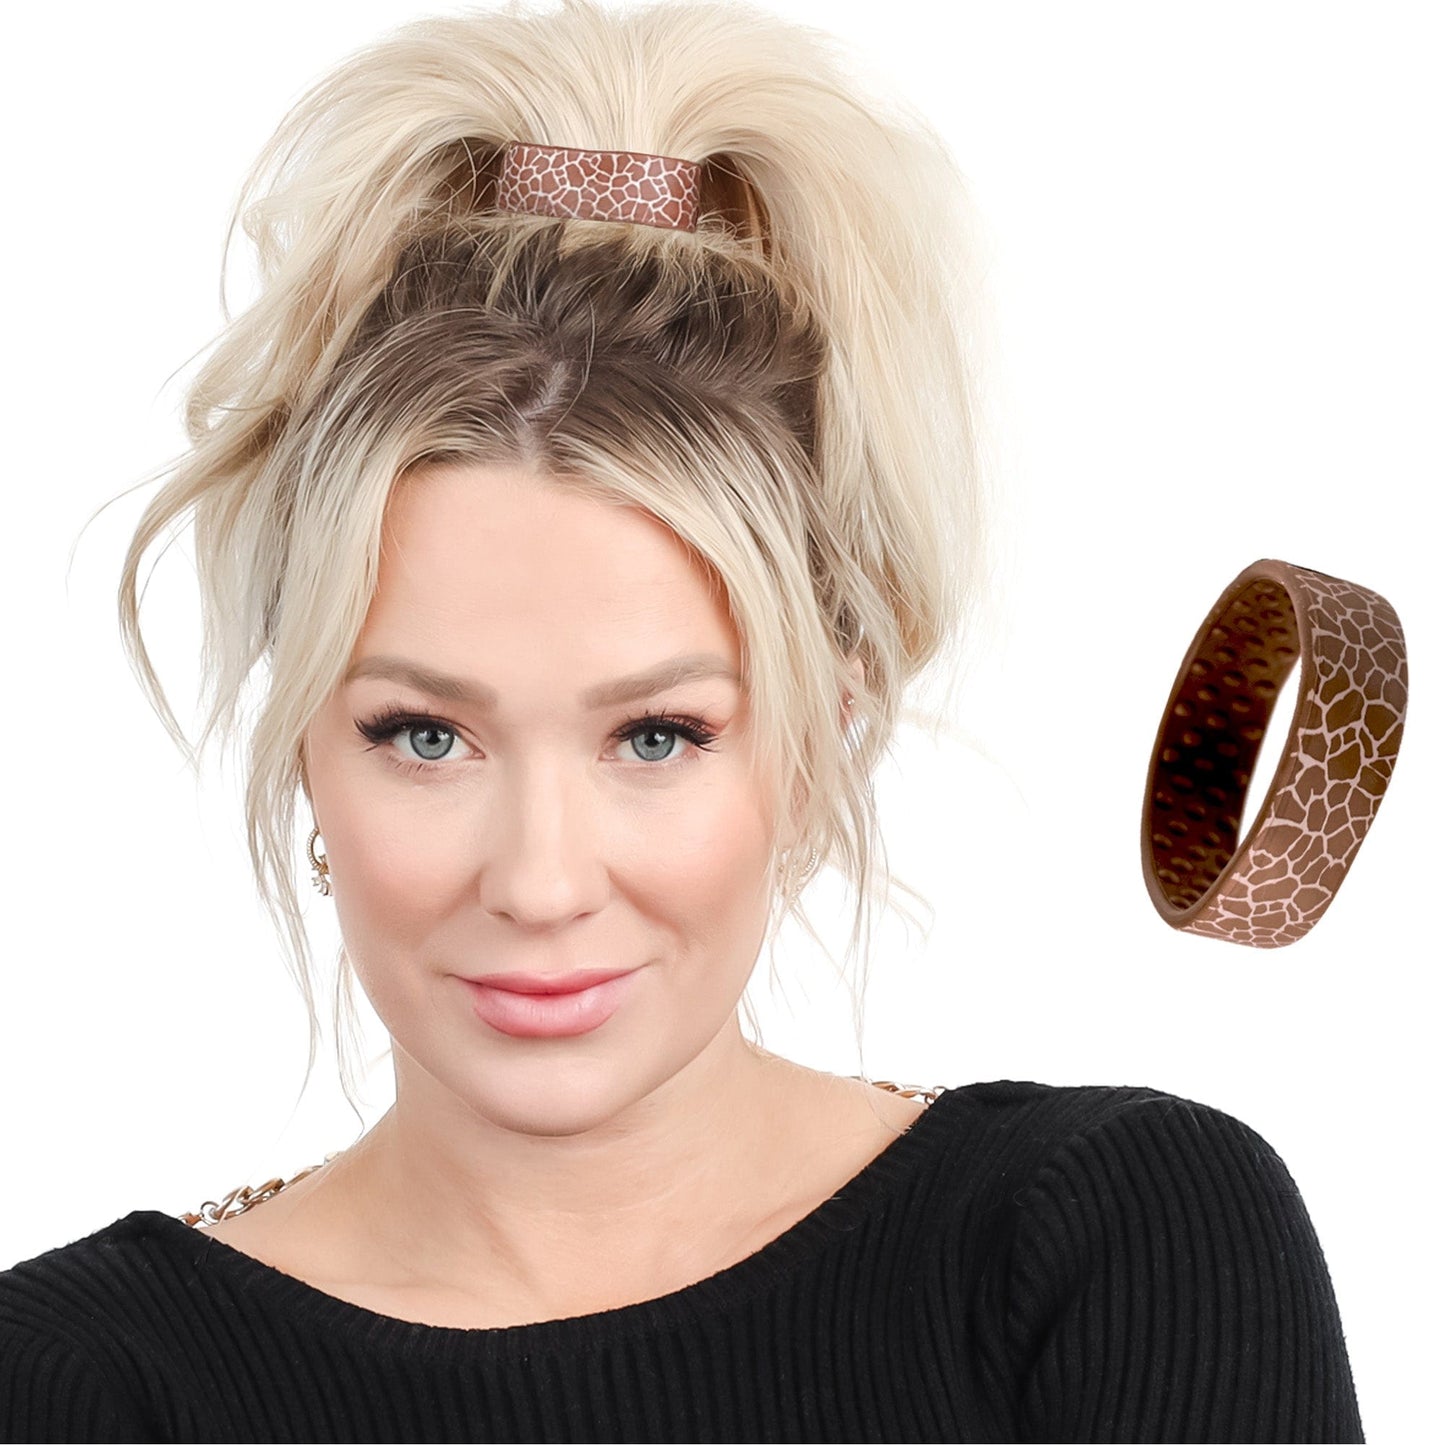 Giraffe Limited Edition Designer PONY-O. This larger size is perfect for ponytails and all-up styles.